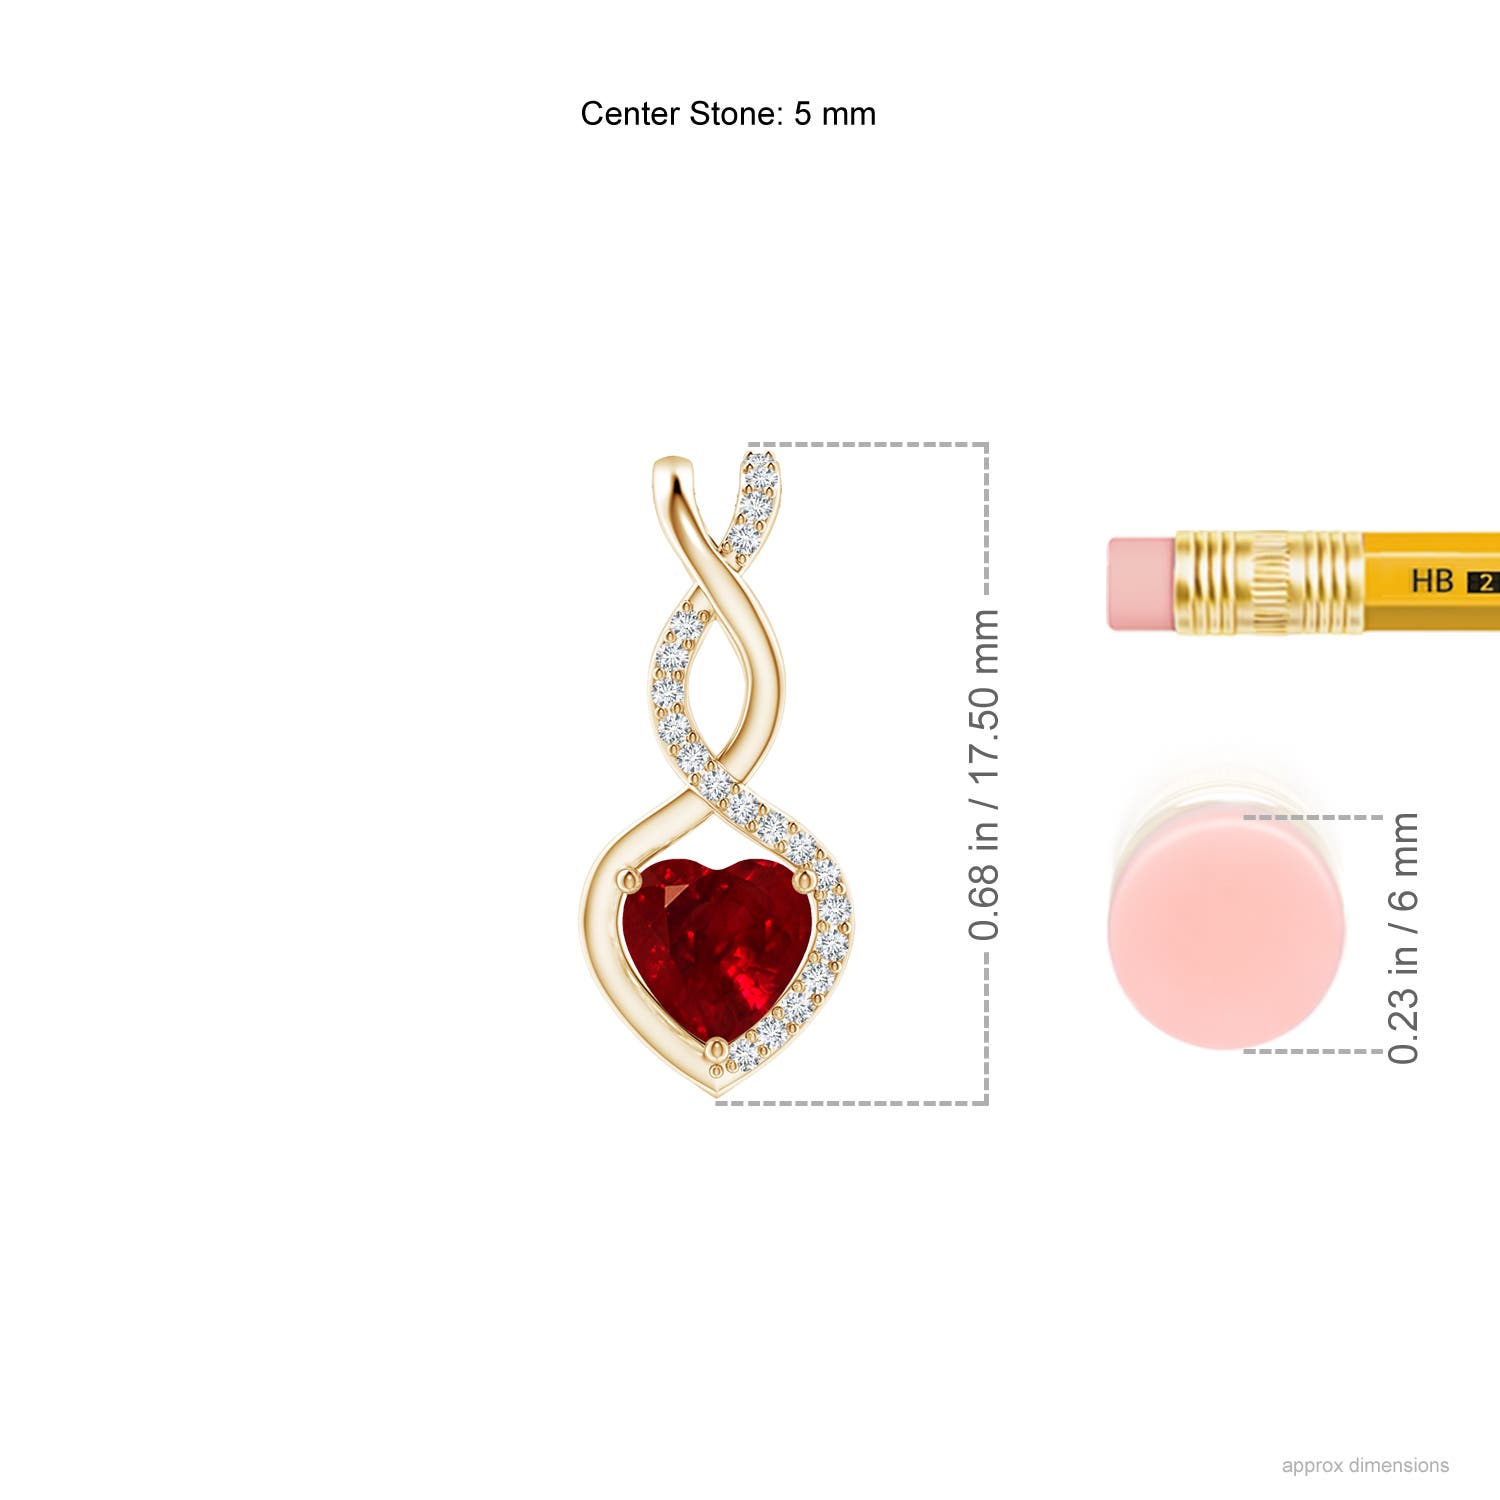 AAAA - Ruby / 0.61 CT / 14 KT Yellow Gold